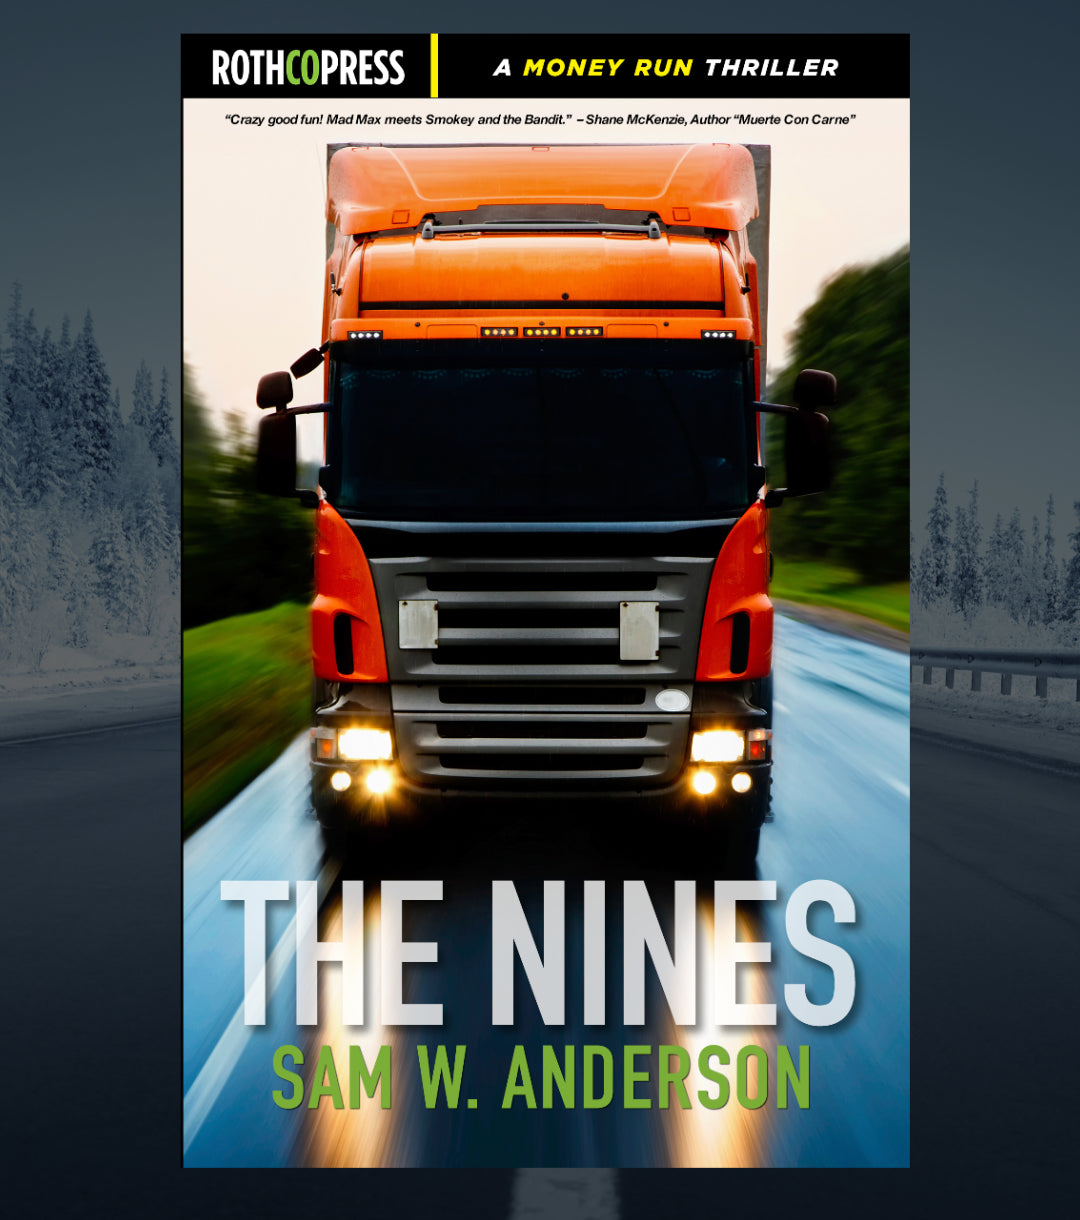 The Nines by Sam W. Anderson